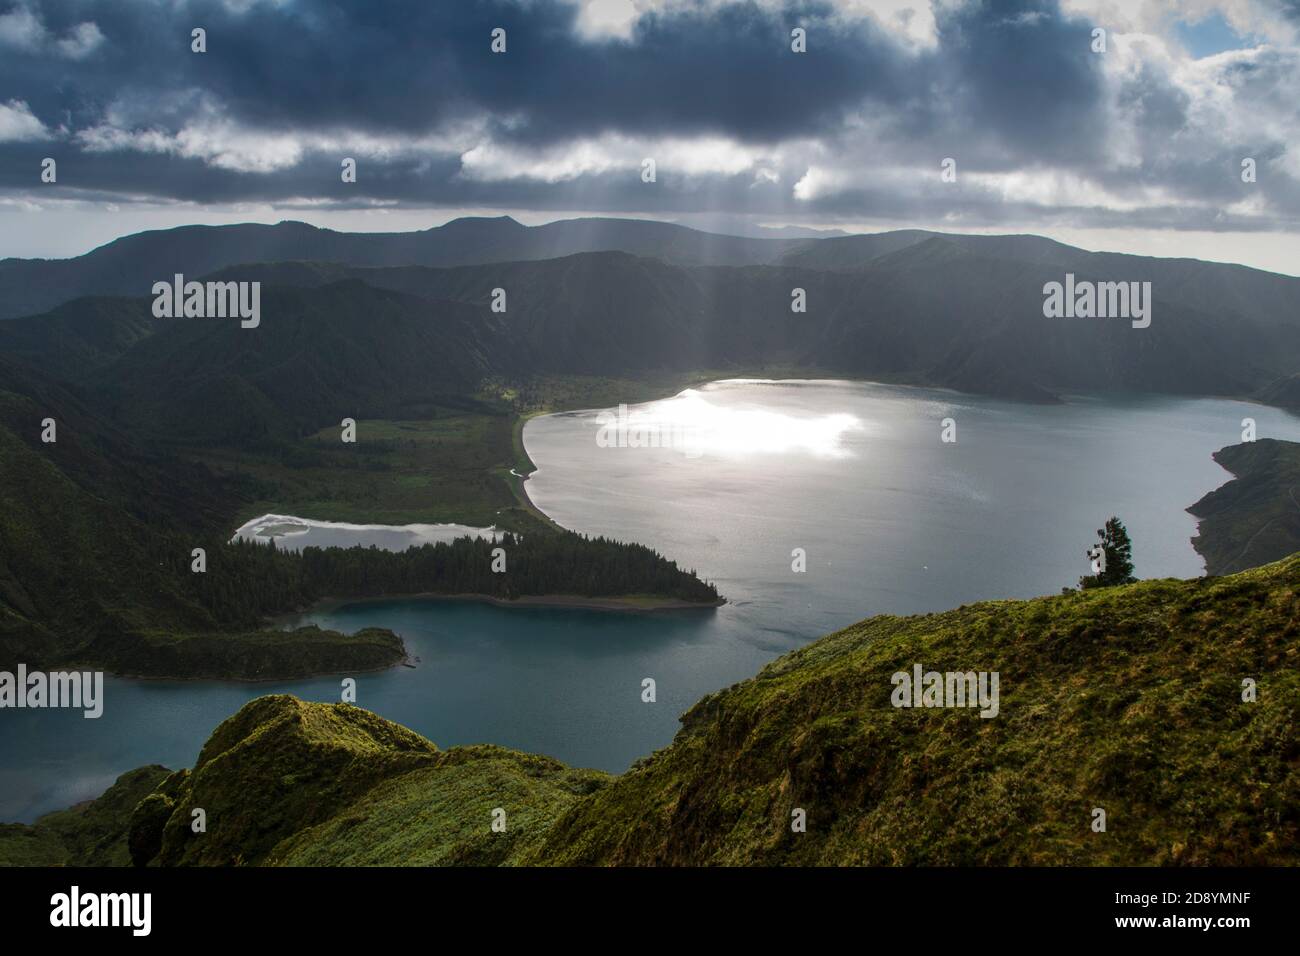 Astounding landscape view of fogo lagoon in azores, under dramatic cloudy sky Stock Photo